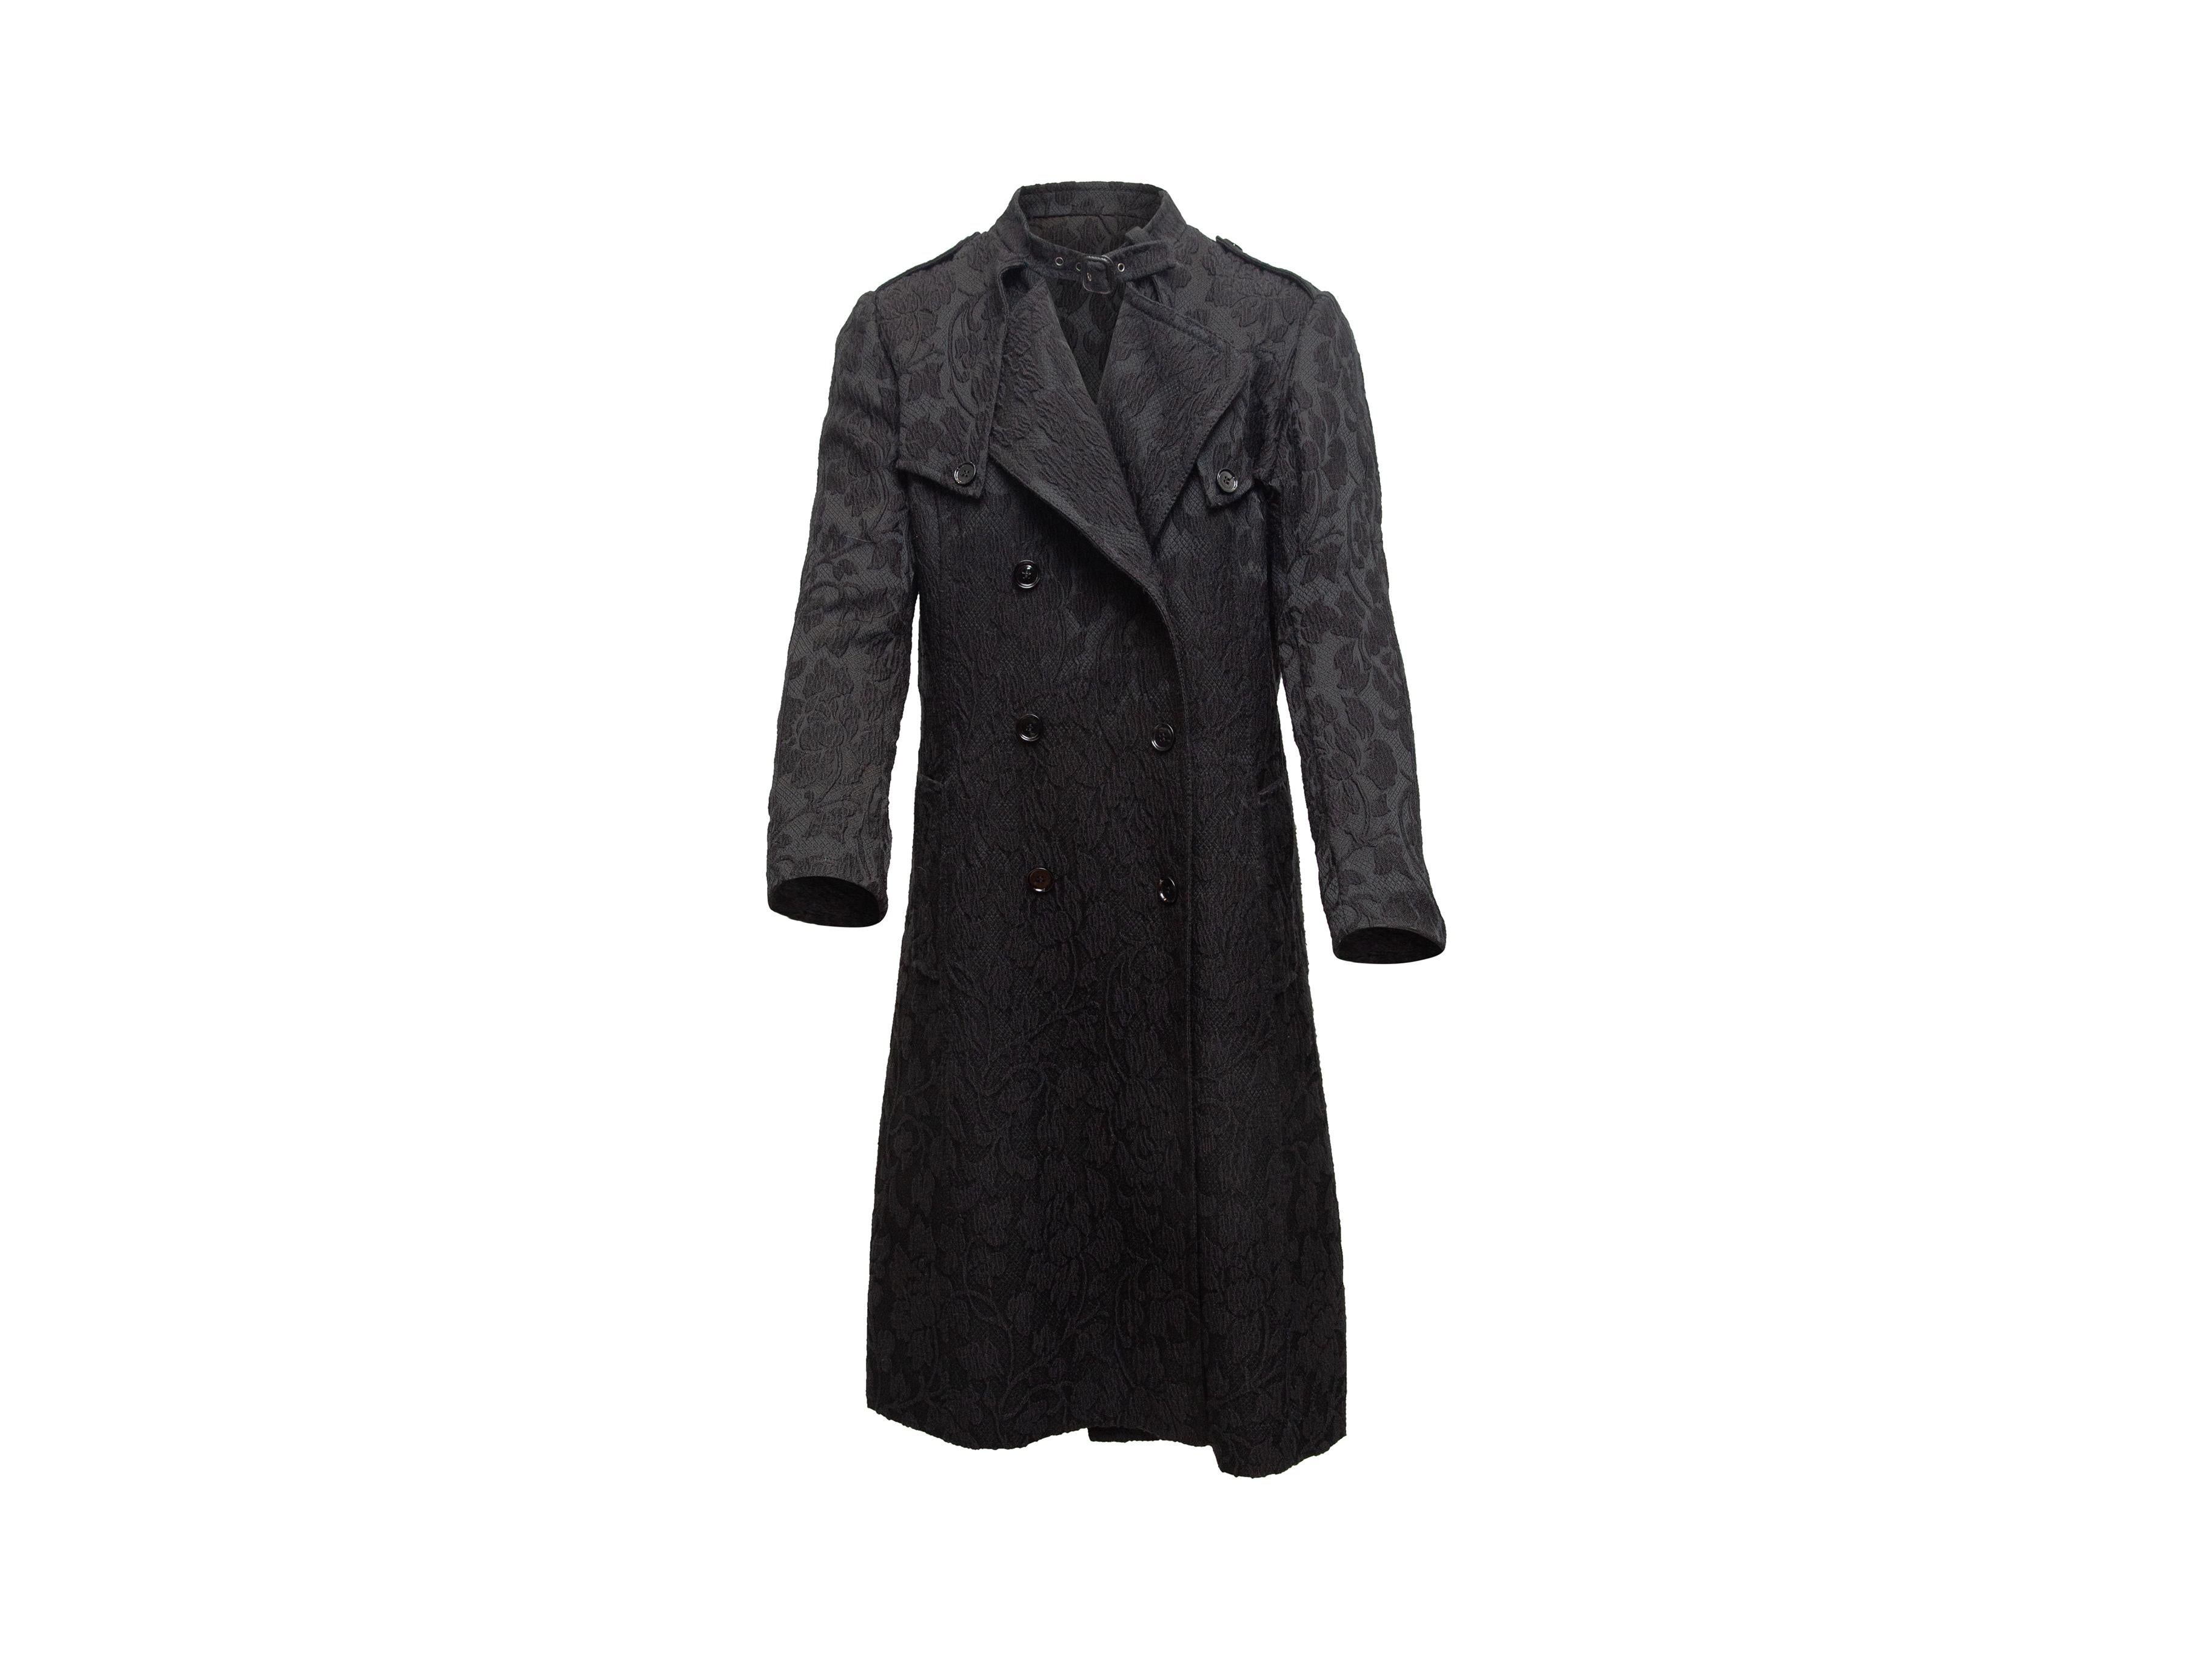 Product details: Black jacquard double-breasted coat by Dolce & Gabbana. Dual hip pockets. Button and buckle closures at front. Designer size 42. 38